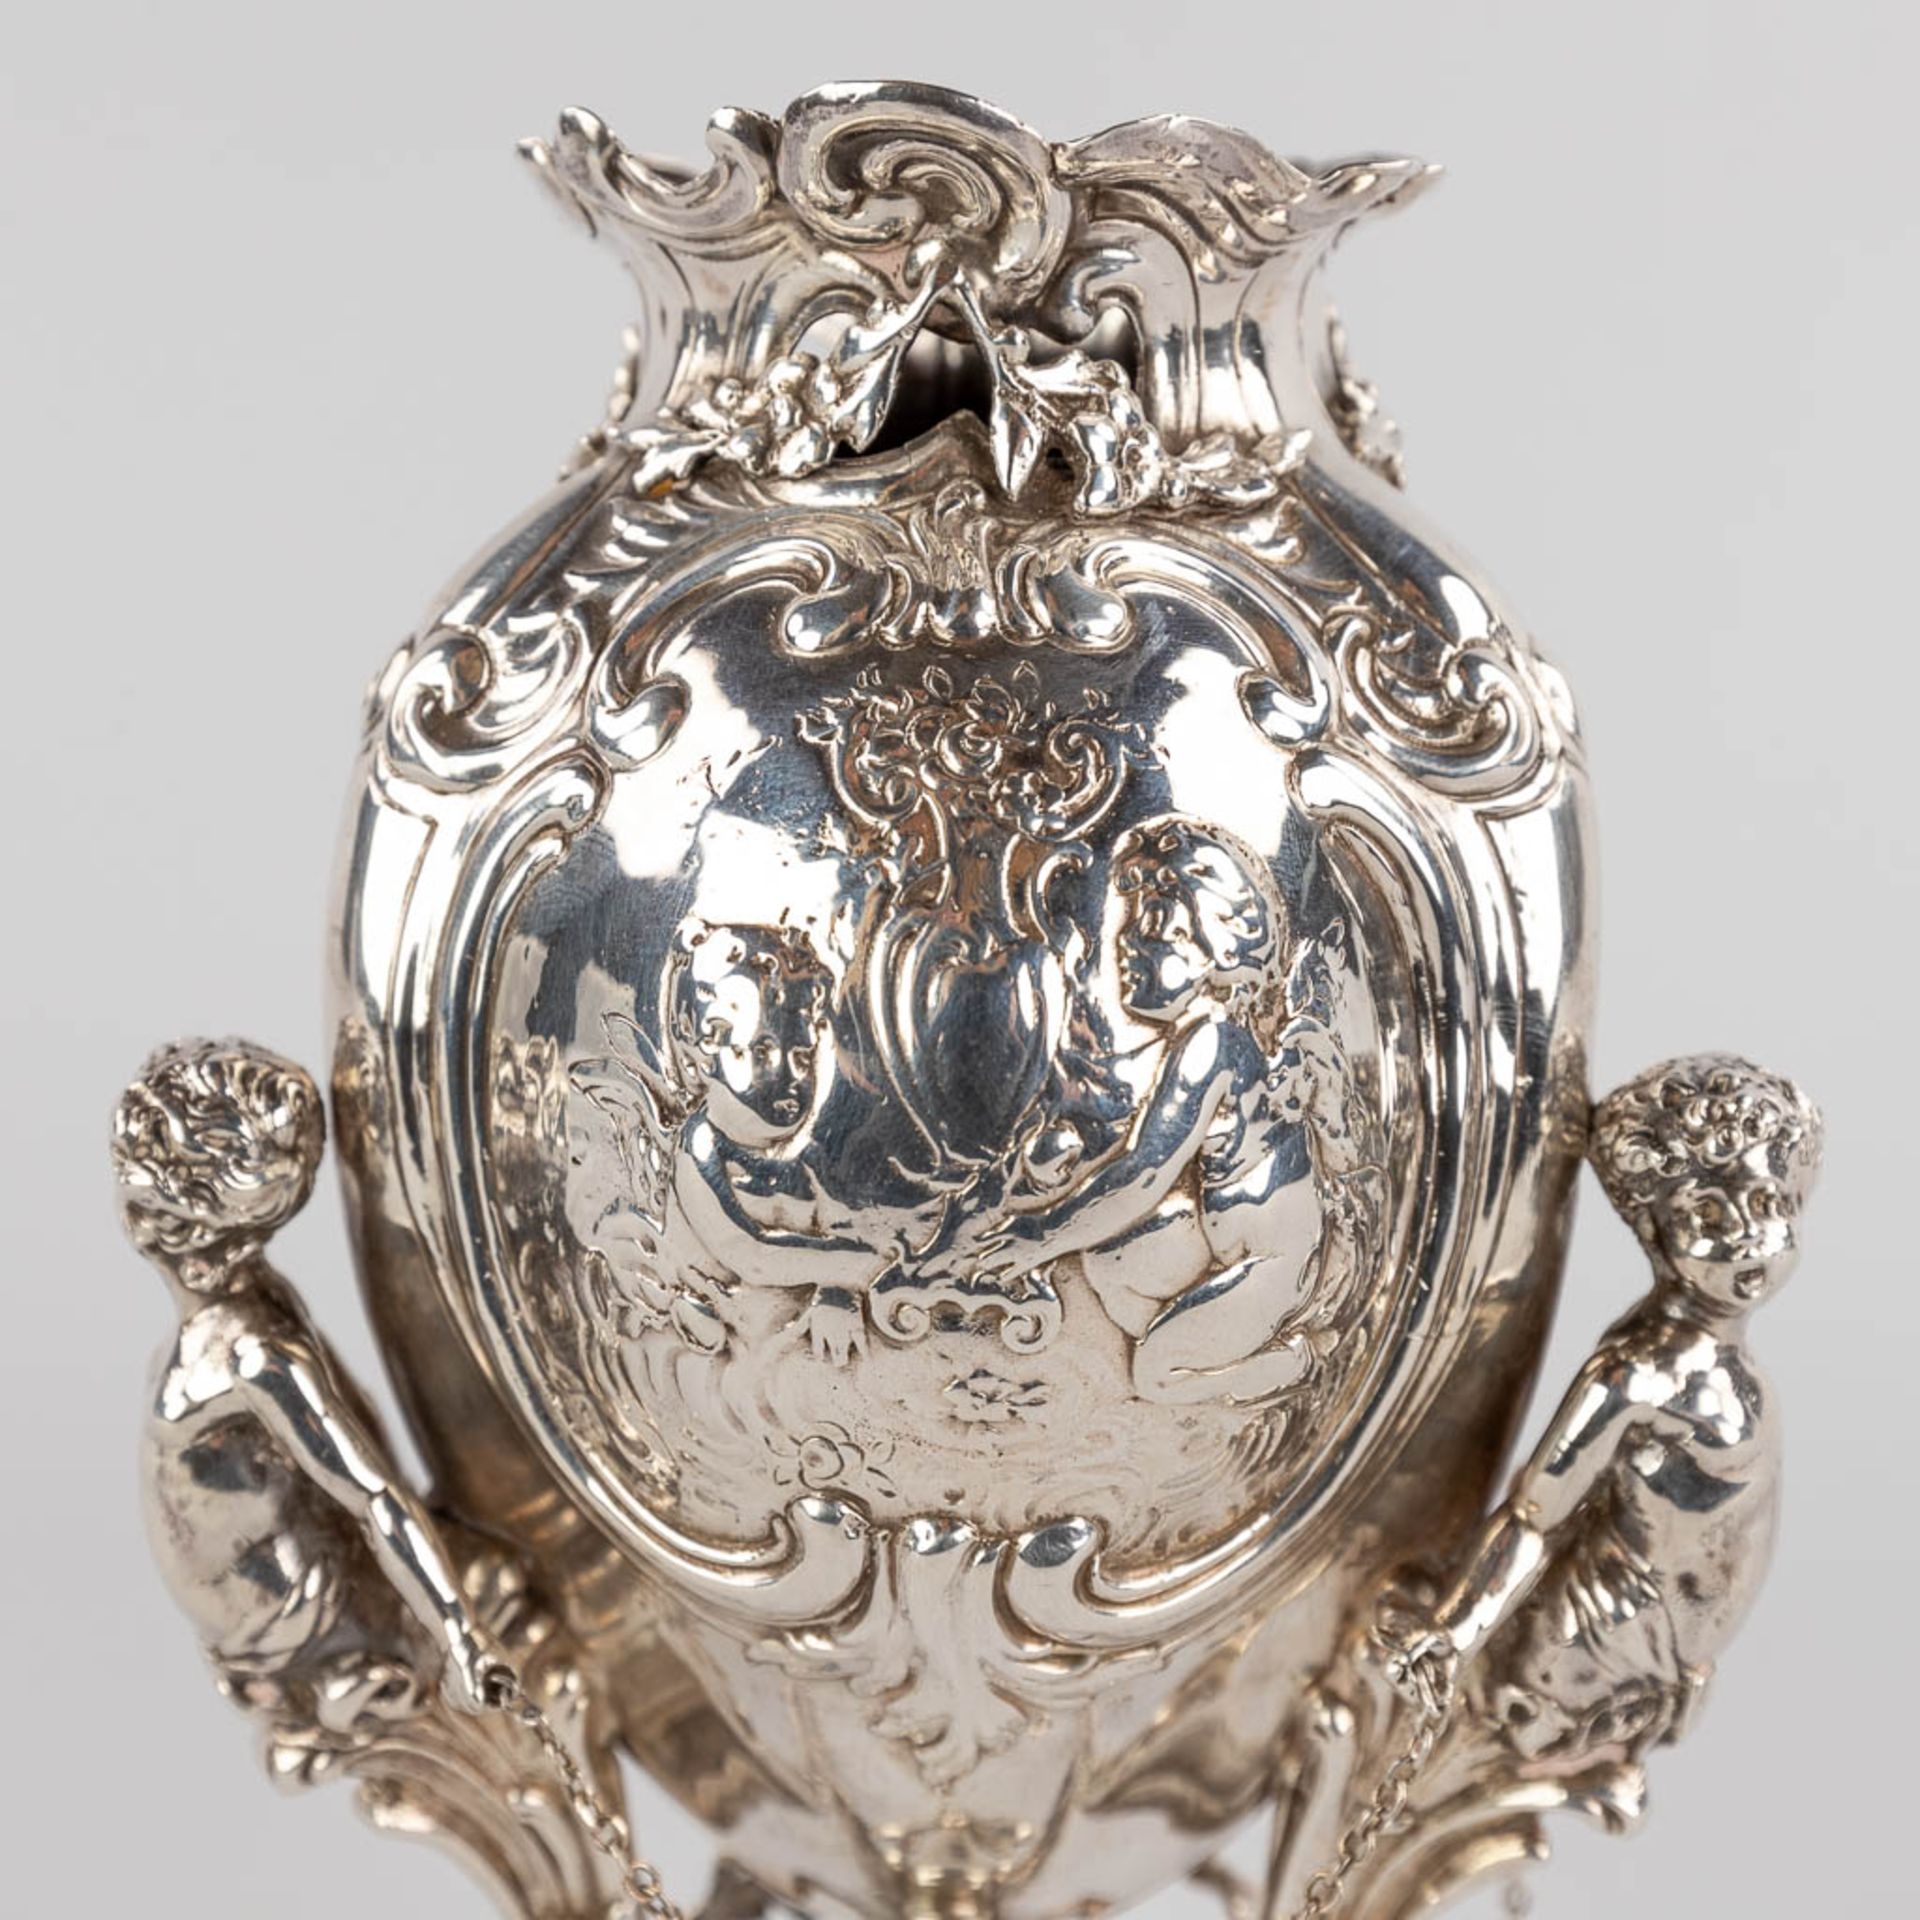 A fine vase, silver in Louis XV style, mounted with 3 putto. 427g. 1906. (D:11 x W:11 x H:20 cm) - Image 8 of 12